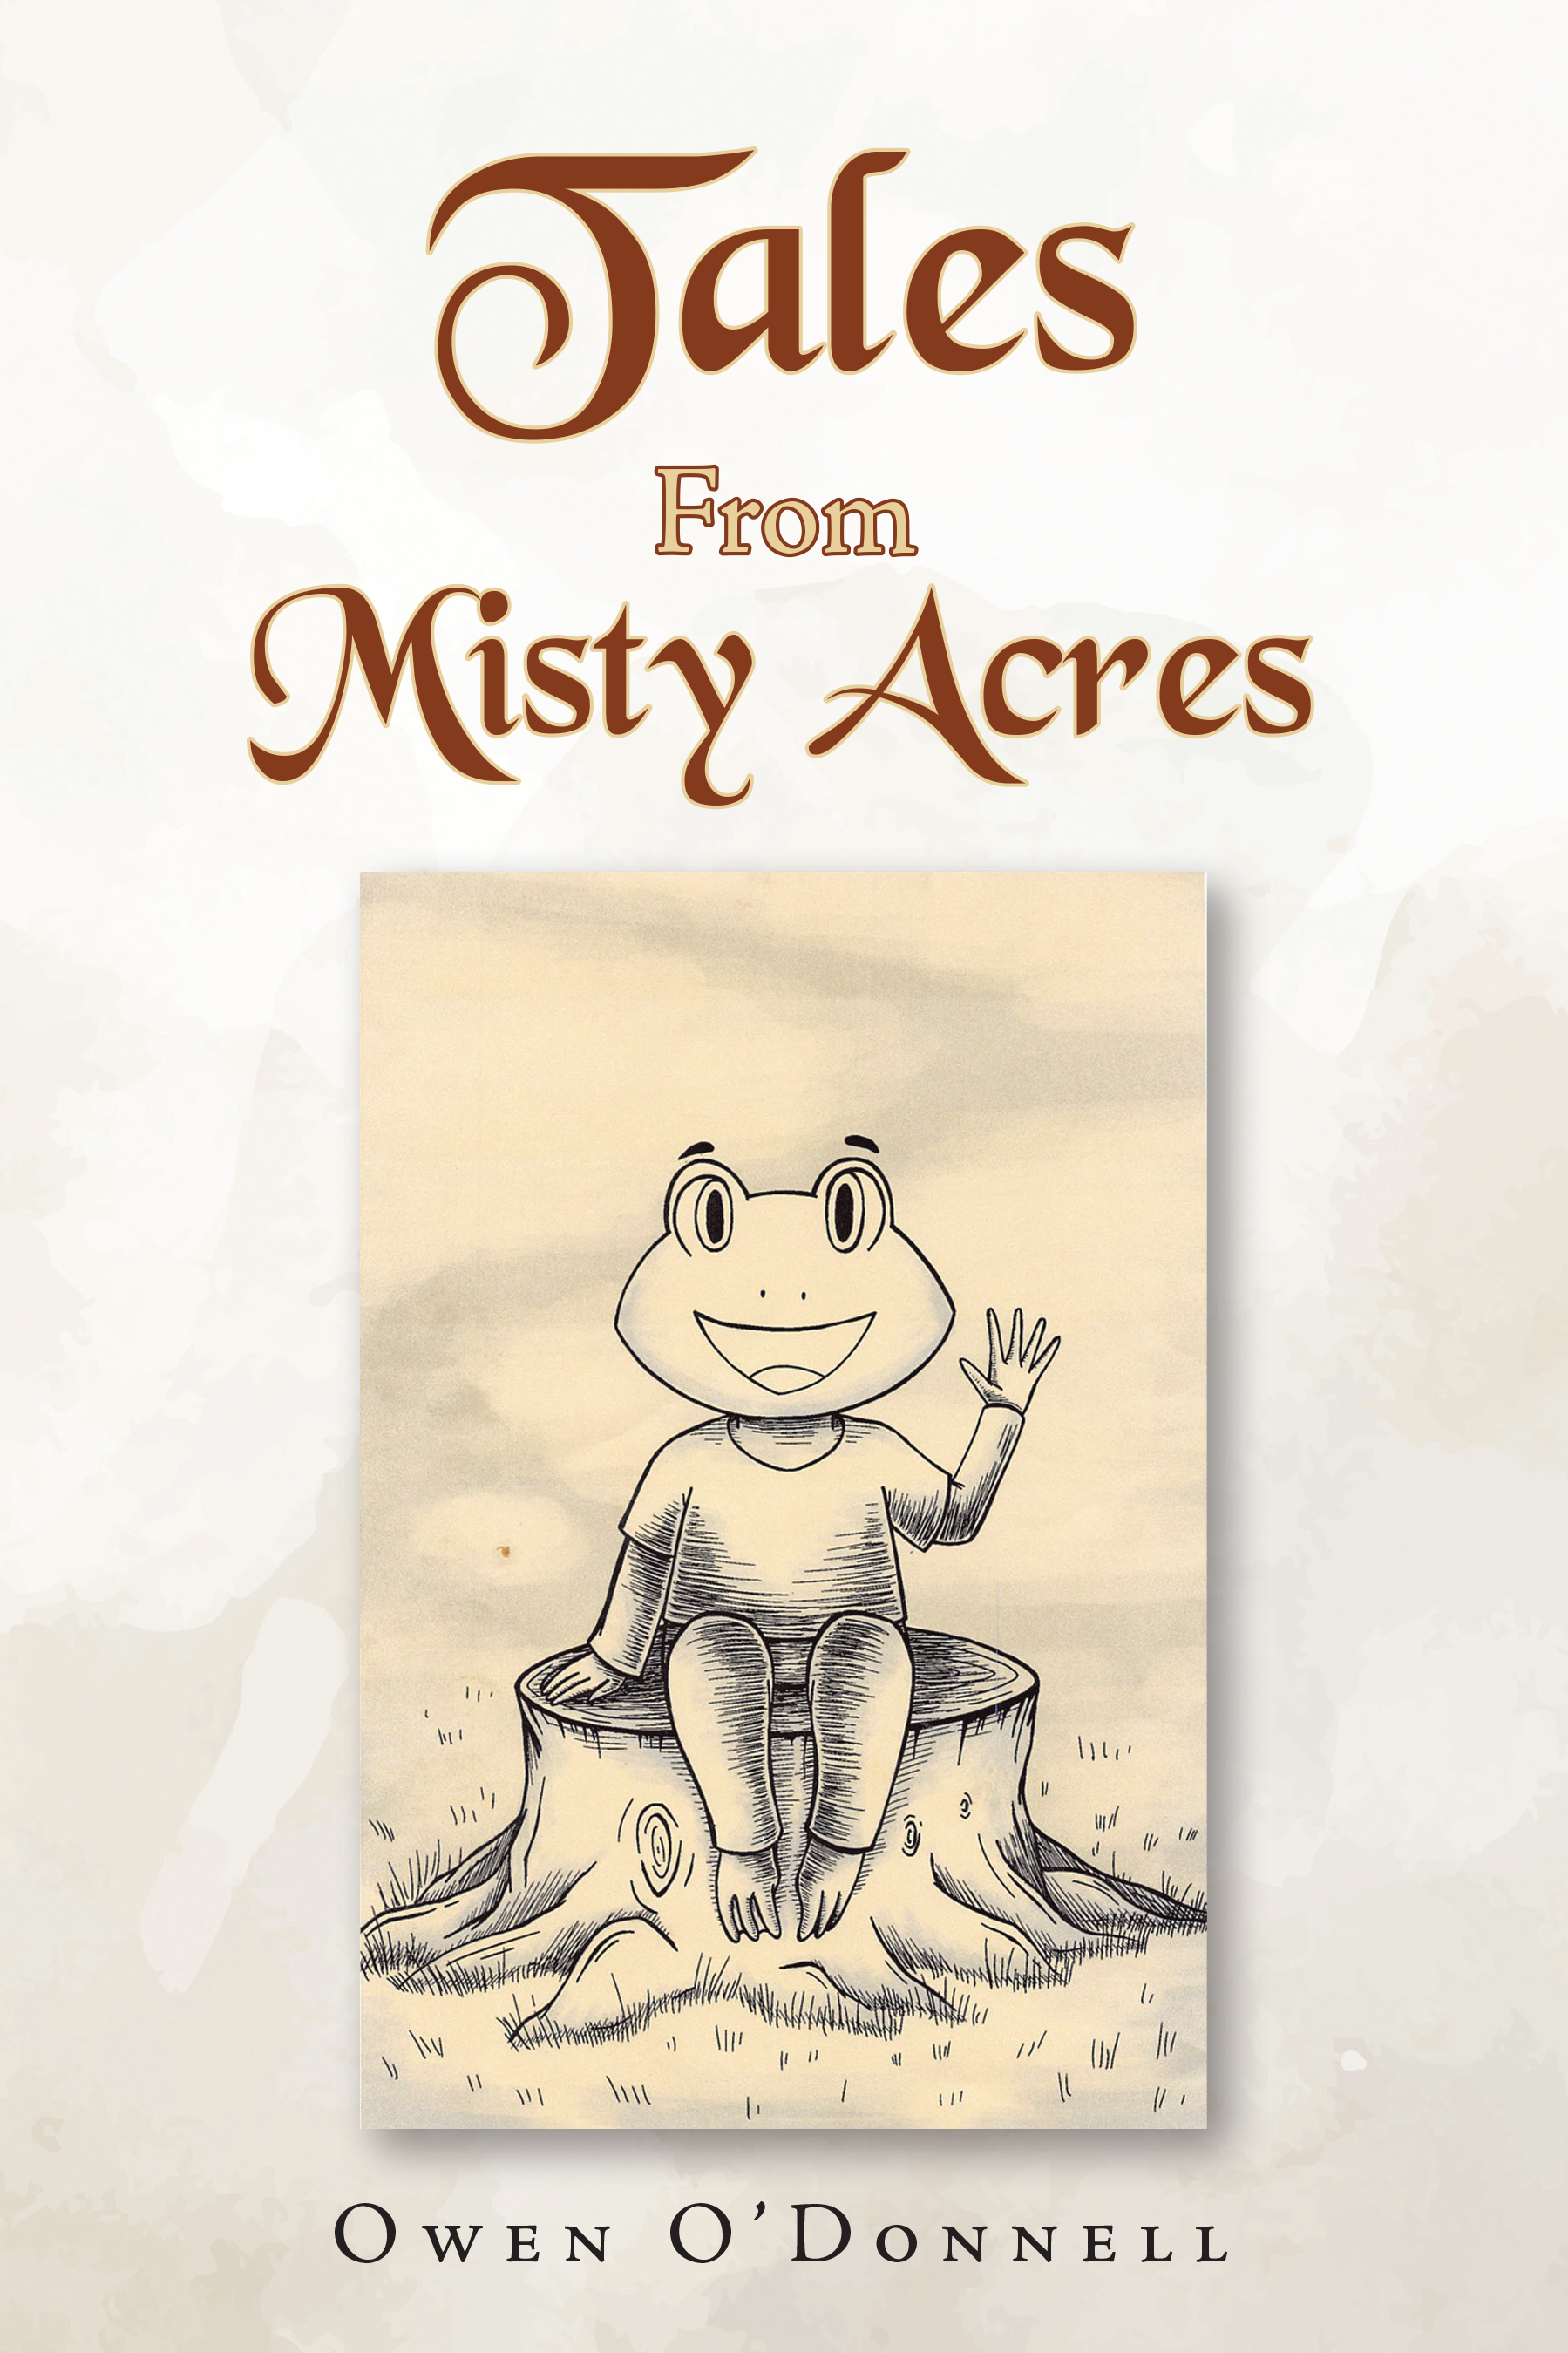 Owen O’Donnell’s Newly Released "Tales From Misty Acres" is a Heartwarming Journey Through the Wonders of Imagination